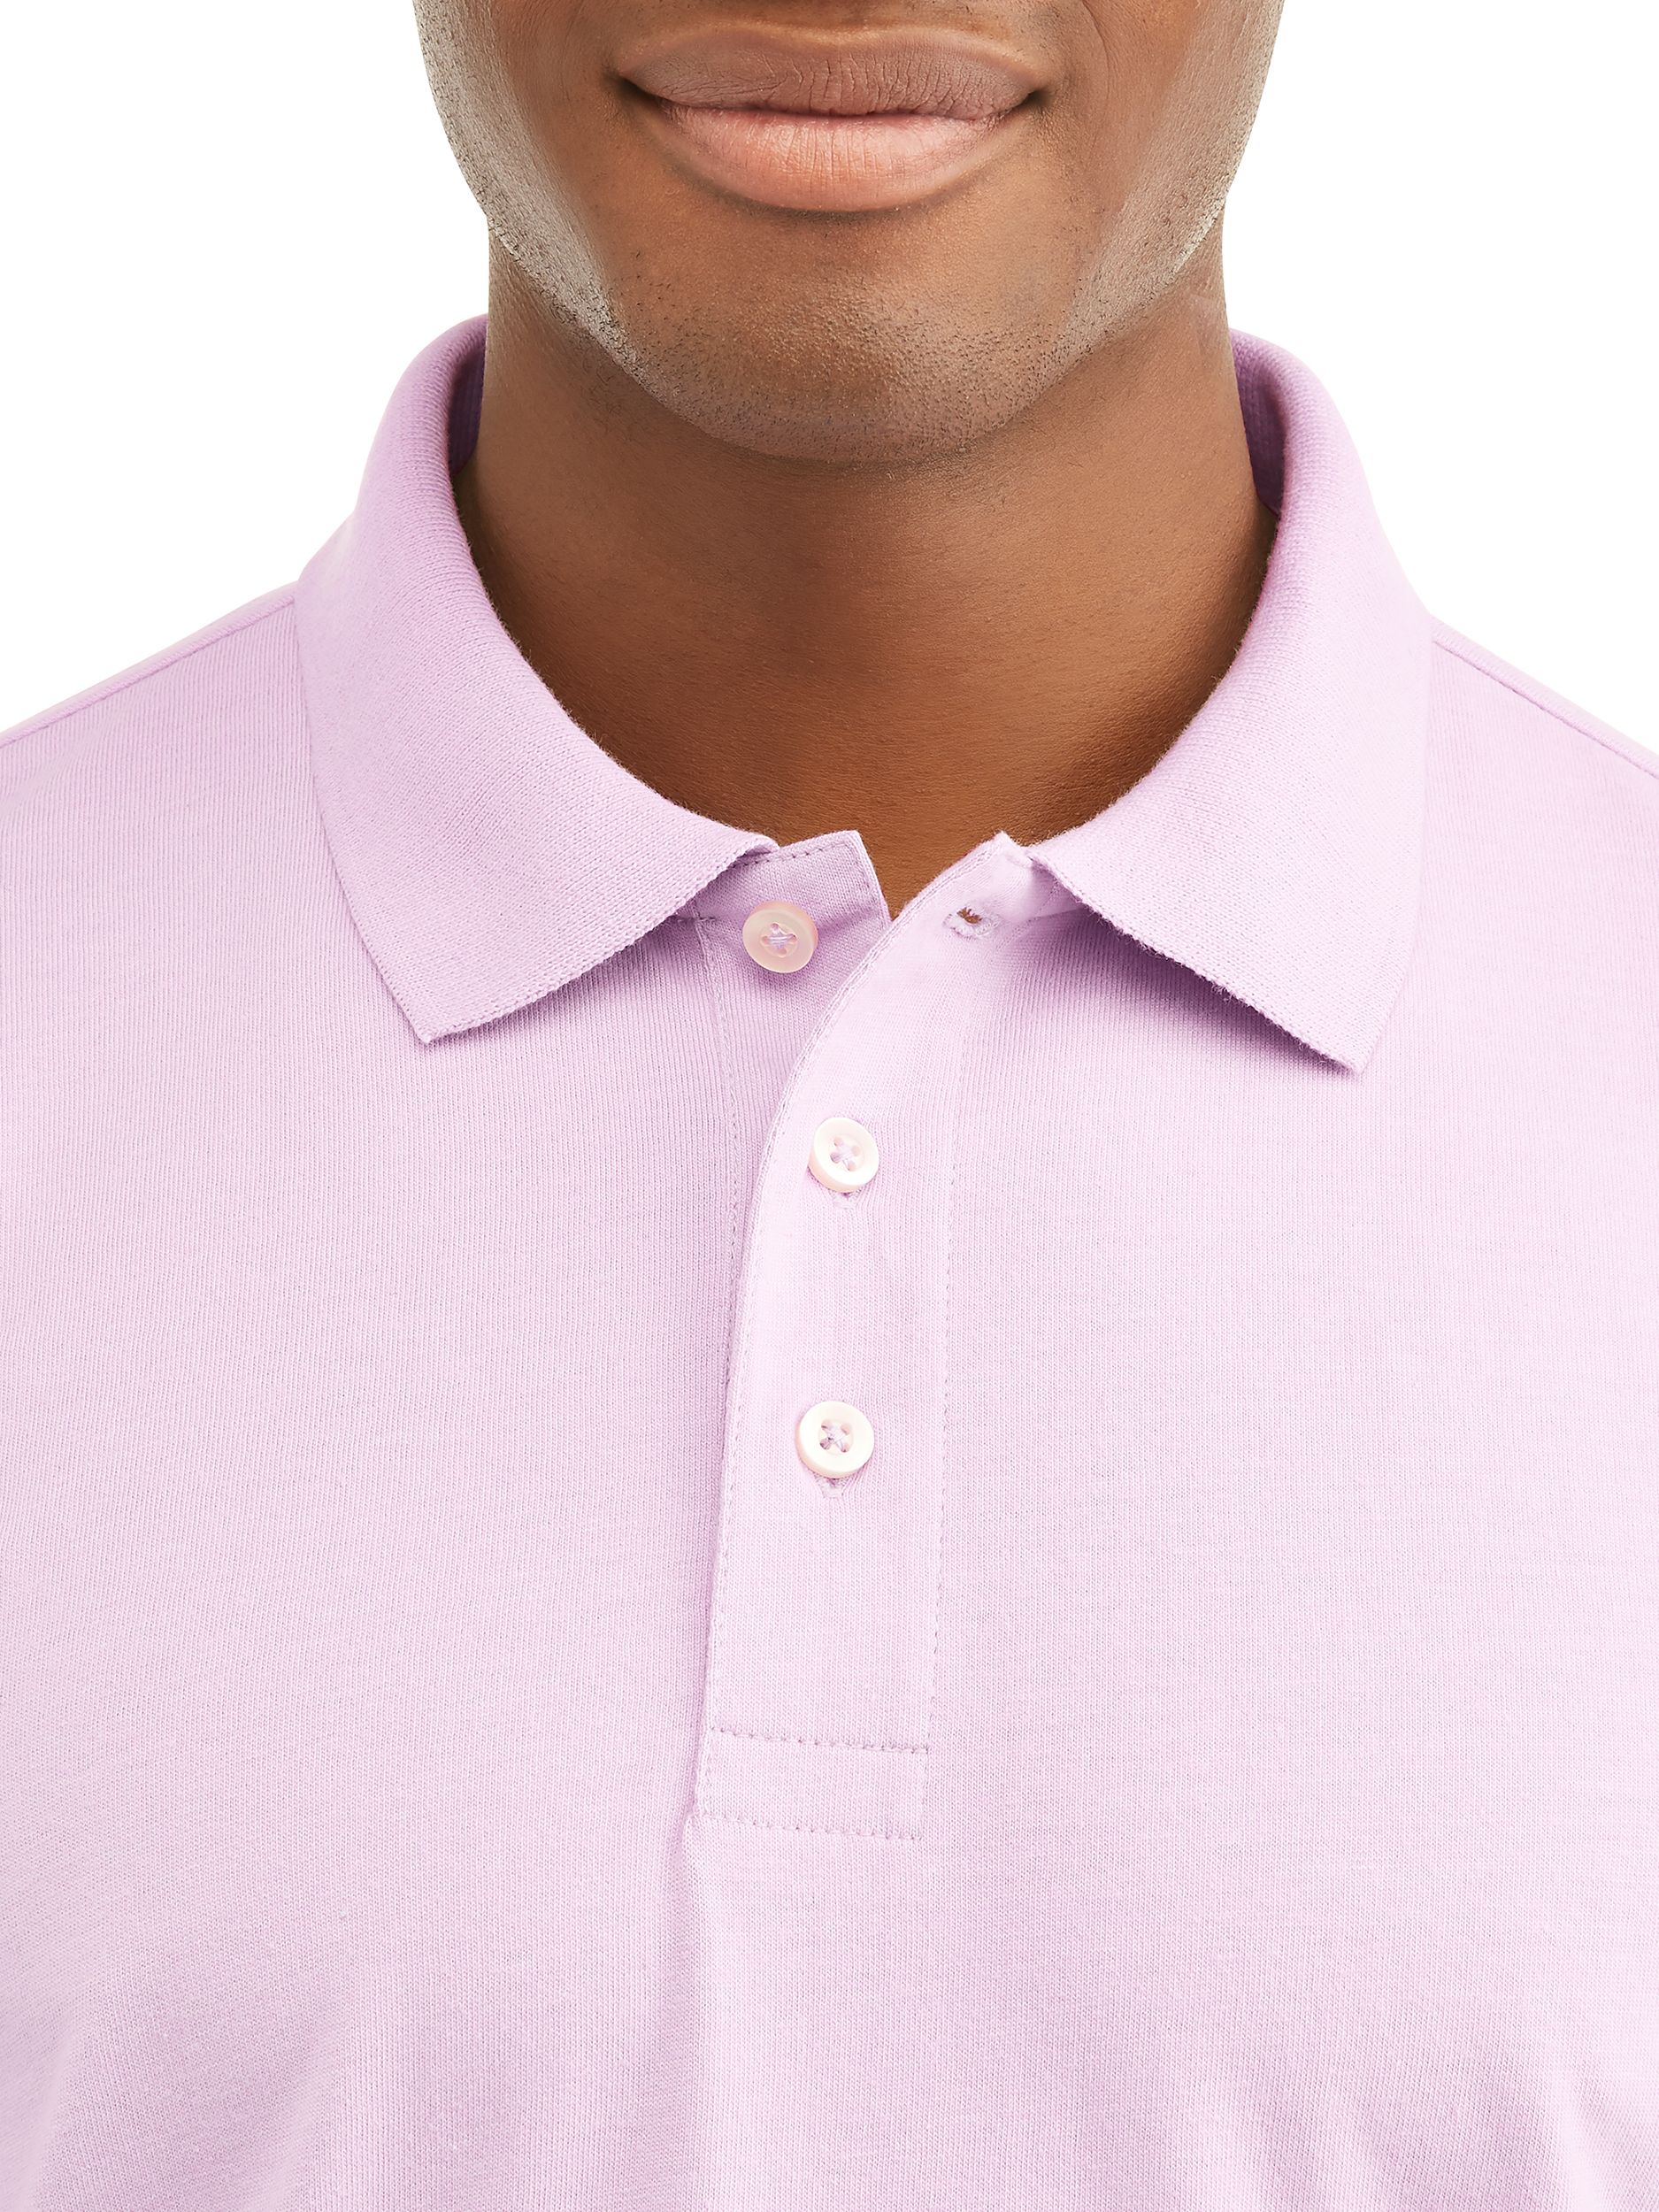 George Men's Short Sleeve Solid Polo Shirt - image 2 of 4